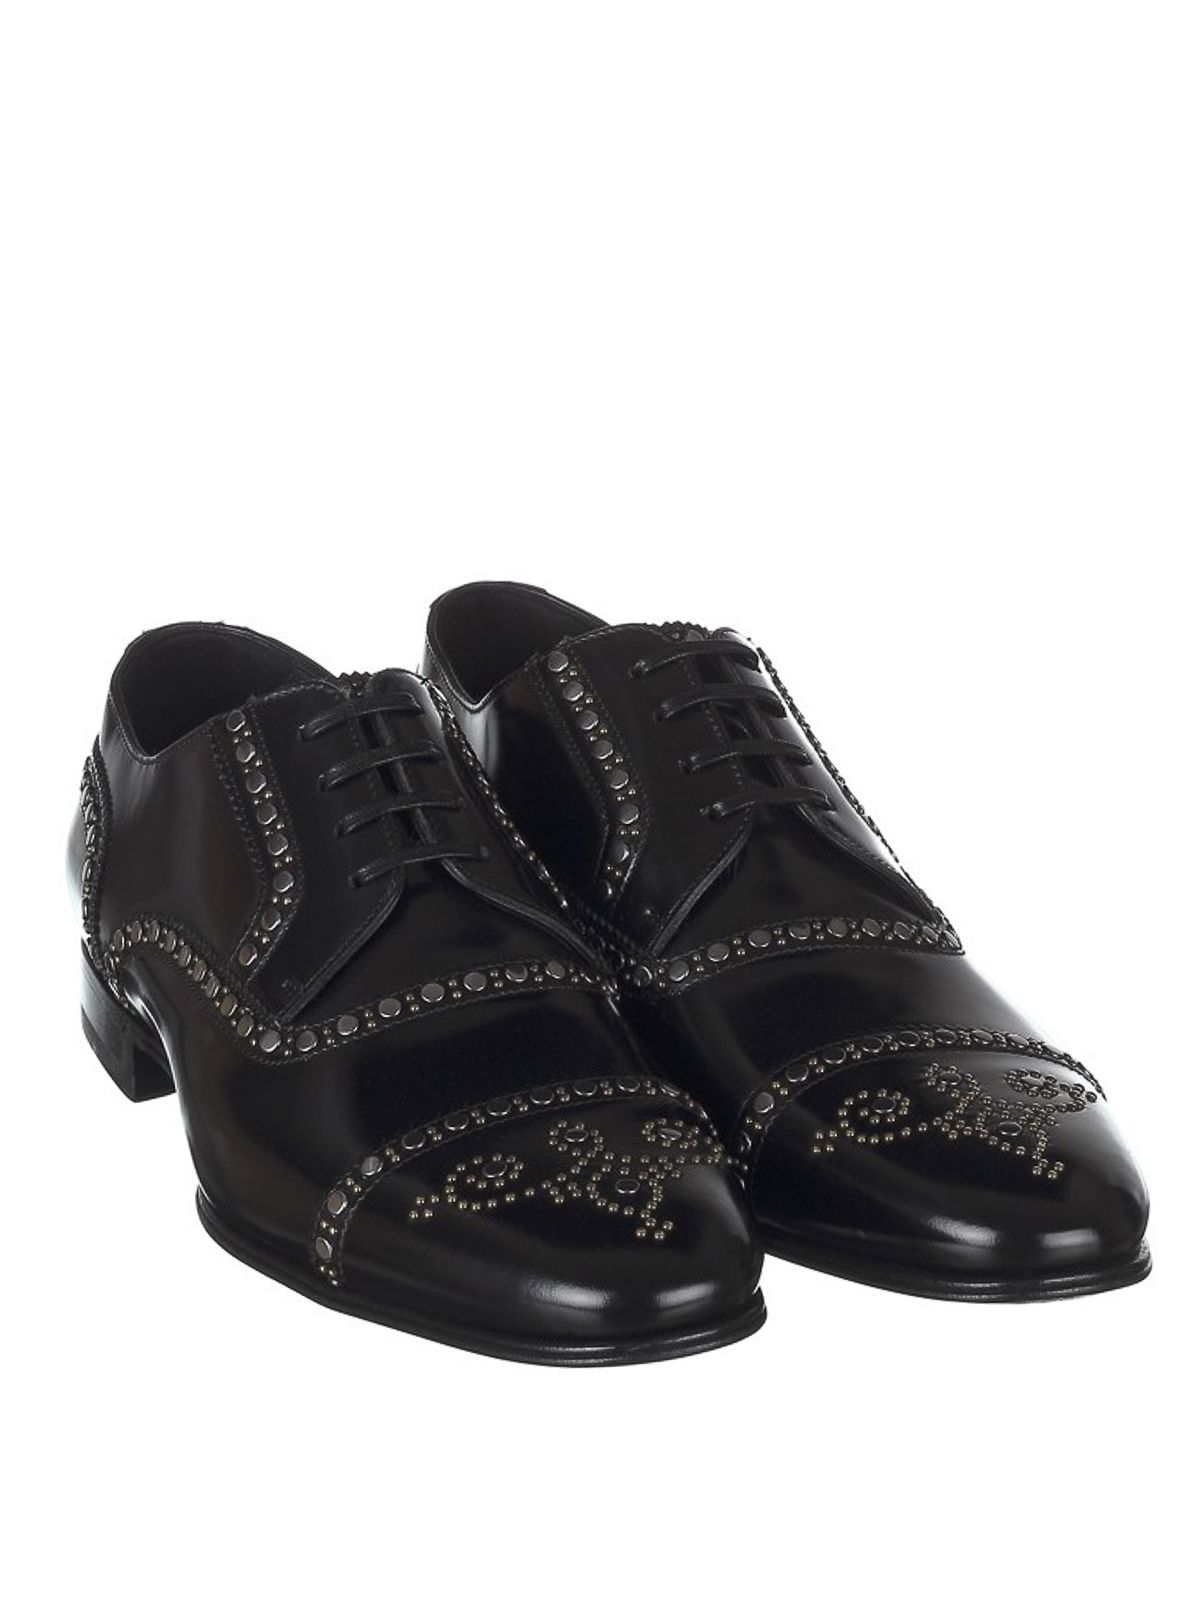 dolce and gabbana shoes online